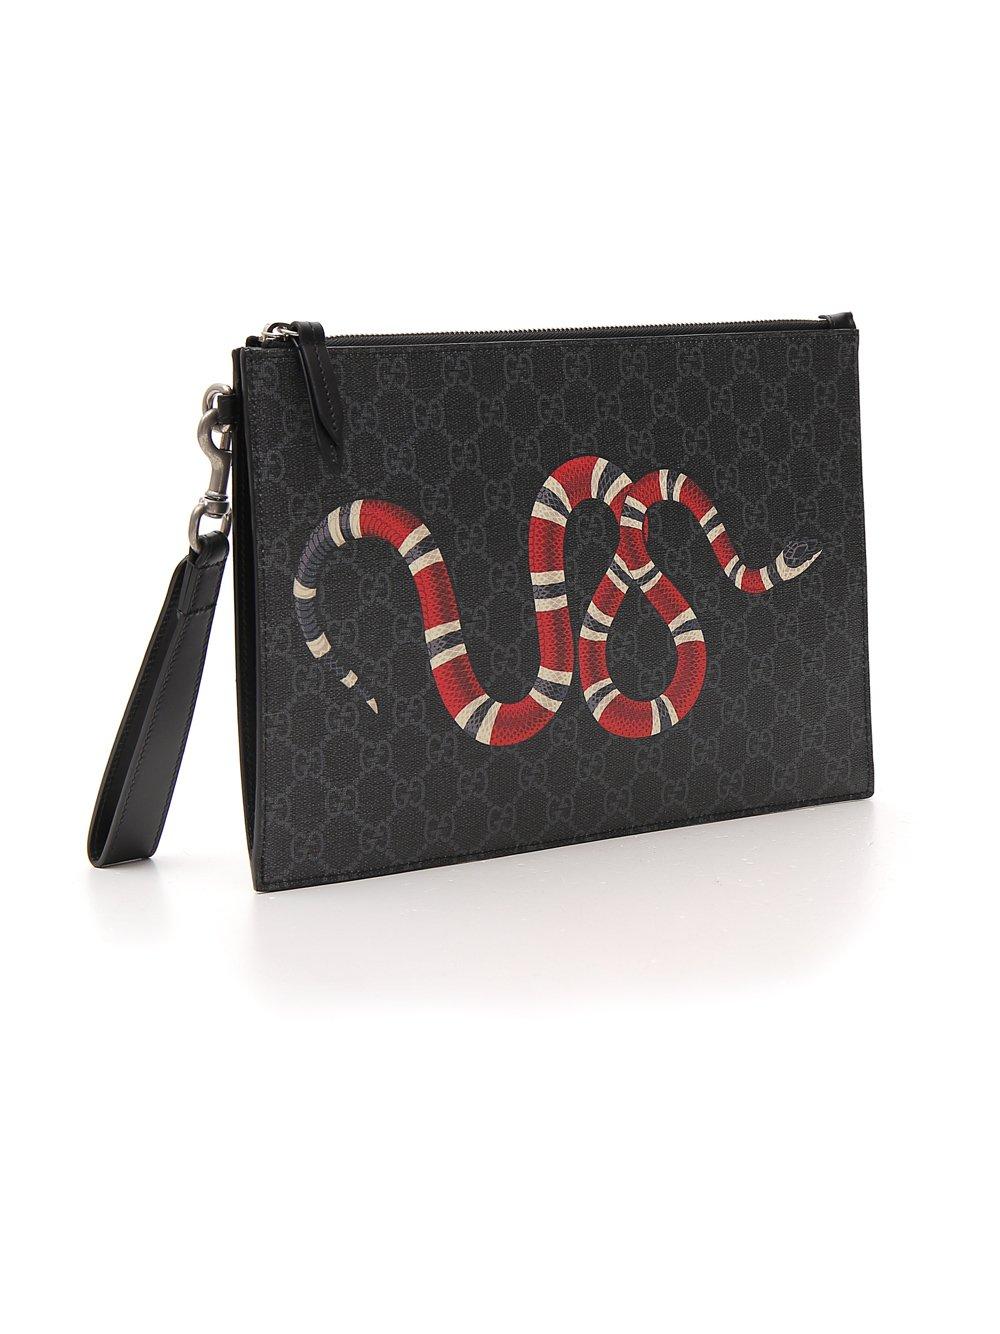 Kingsnake' chiselled metal tray, large by Gucci